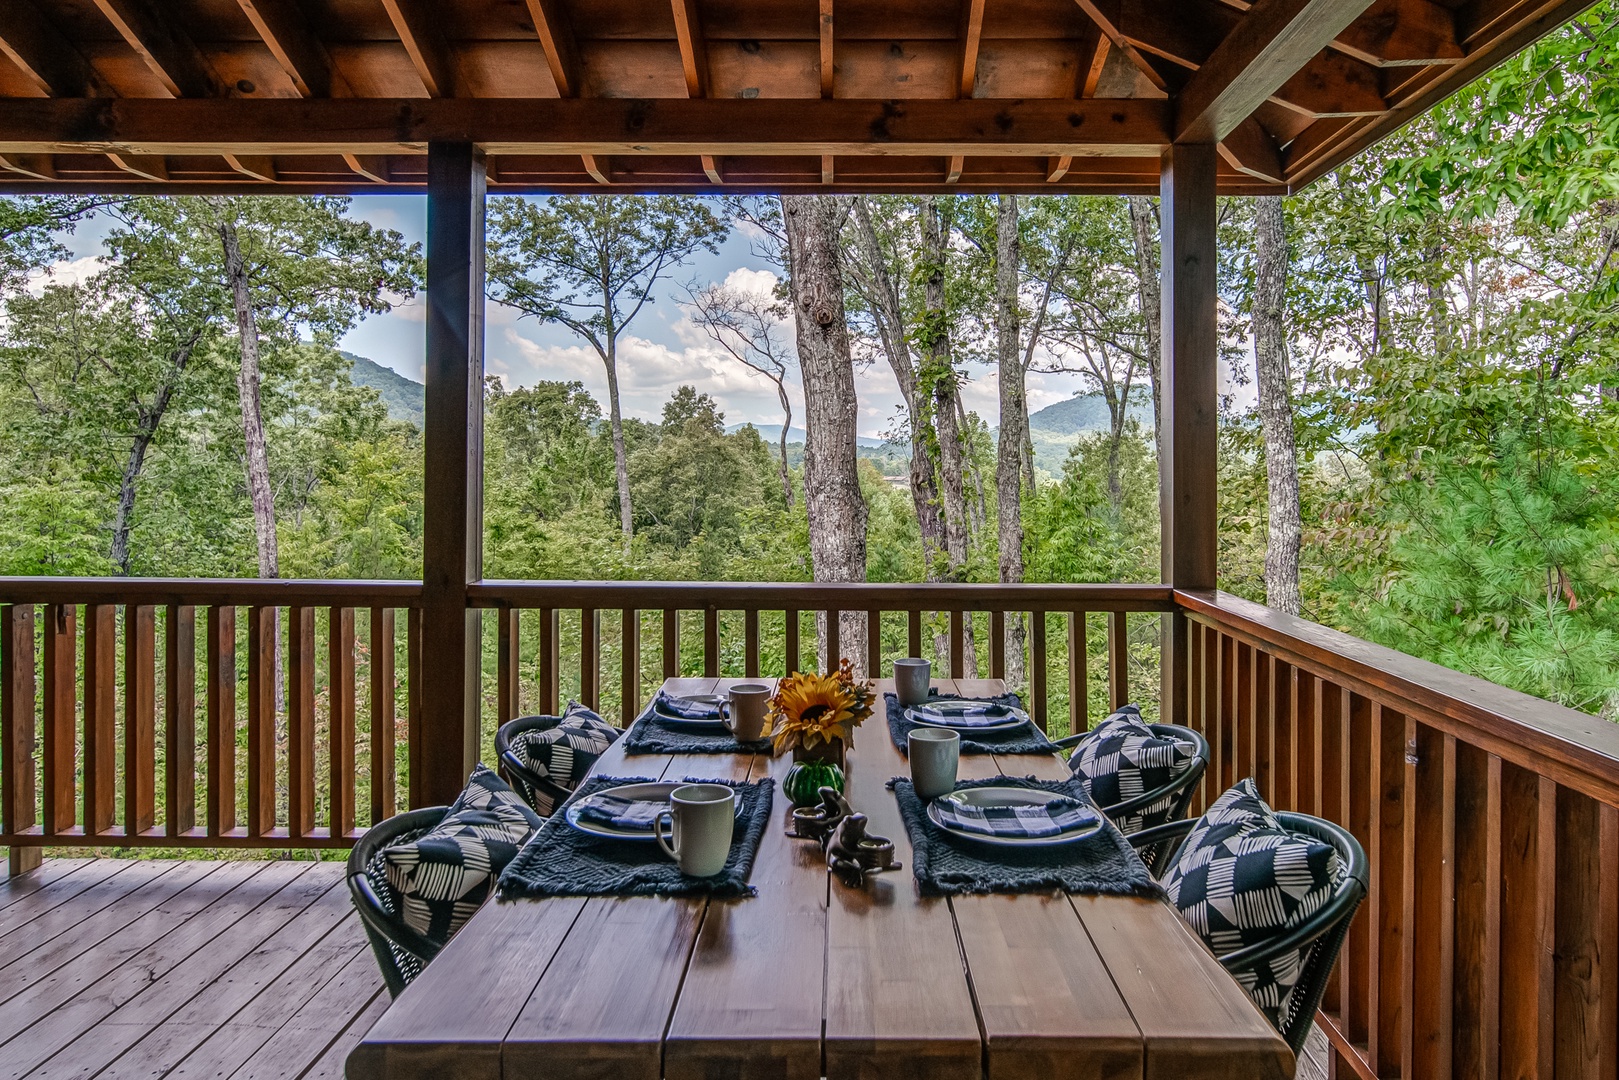 Enjoy a picnic with a view on the covered wraparound deck